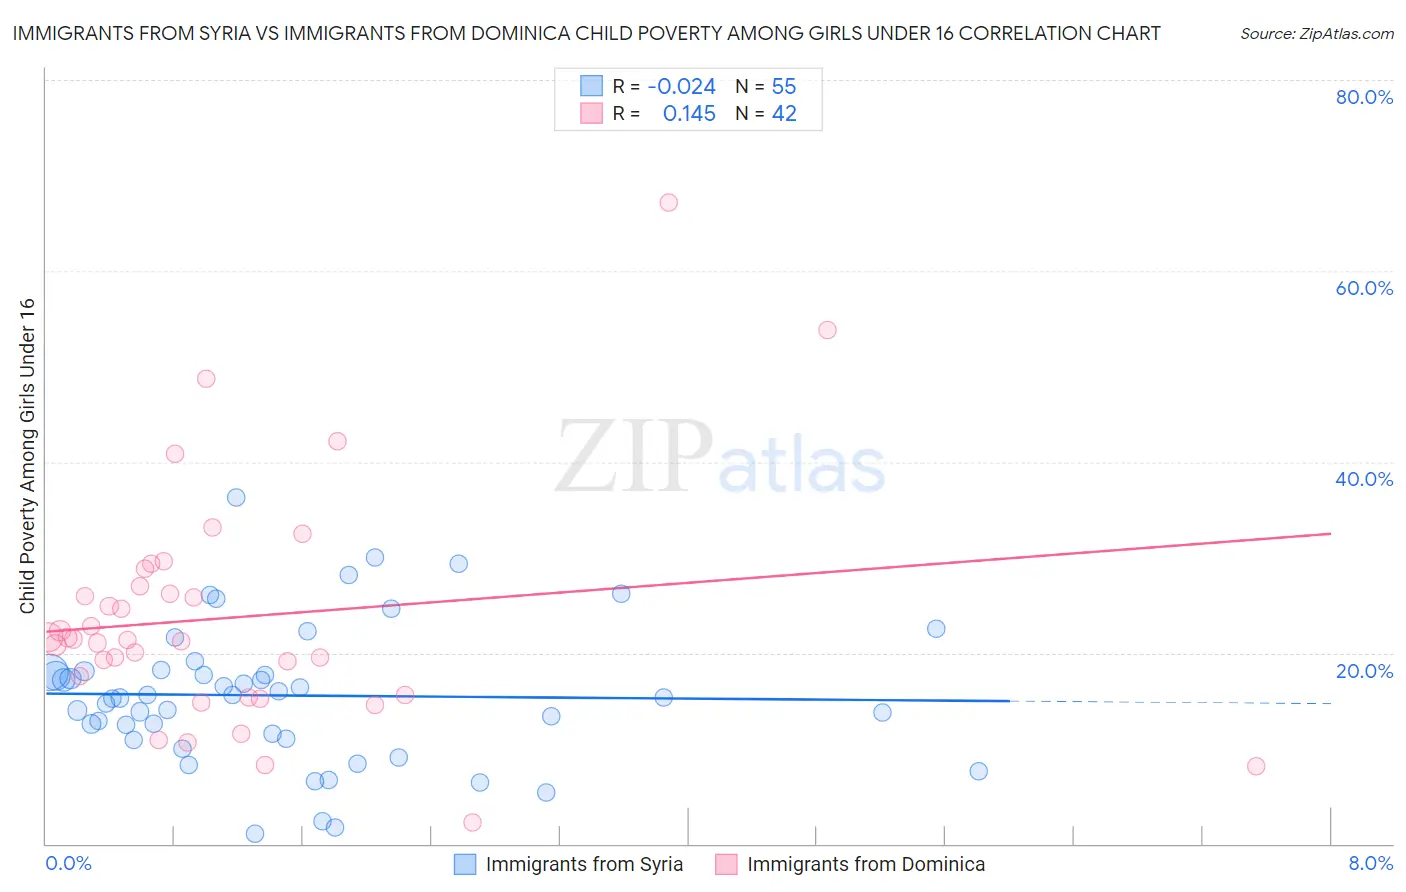 Immigrants from Syria vs Immigrants from Dominica Child Poverty Among Girls Under 16